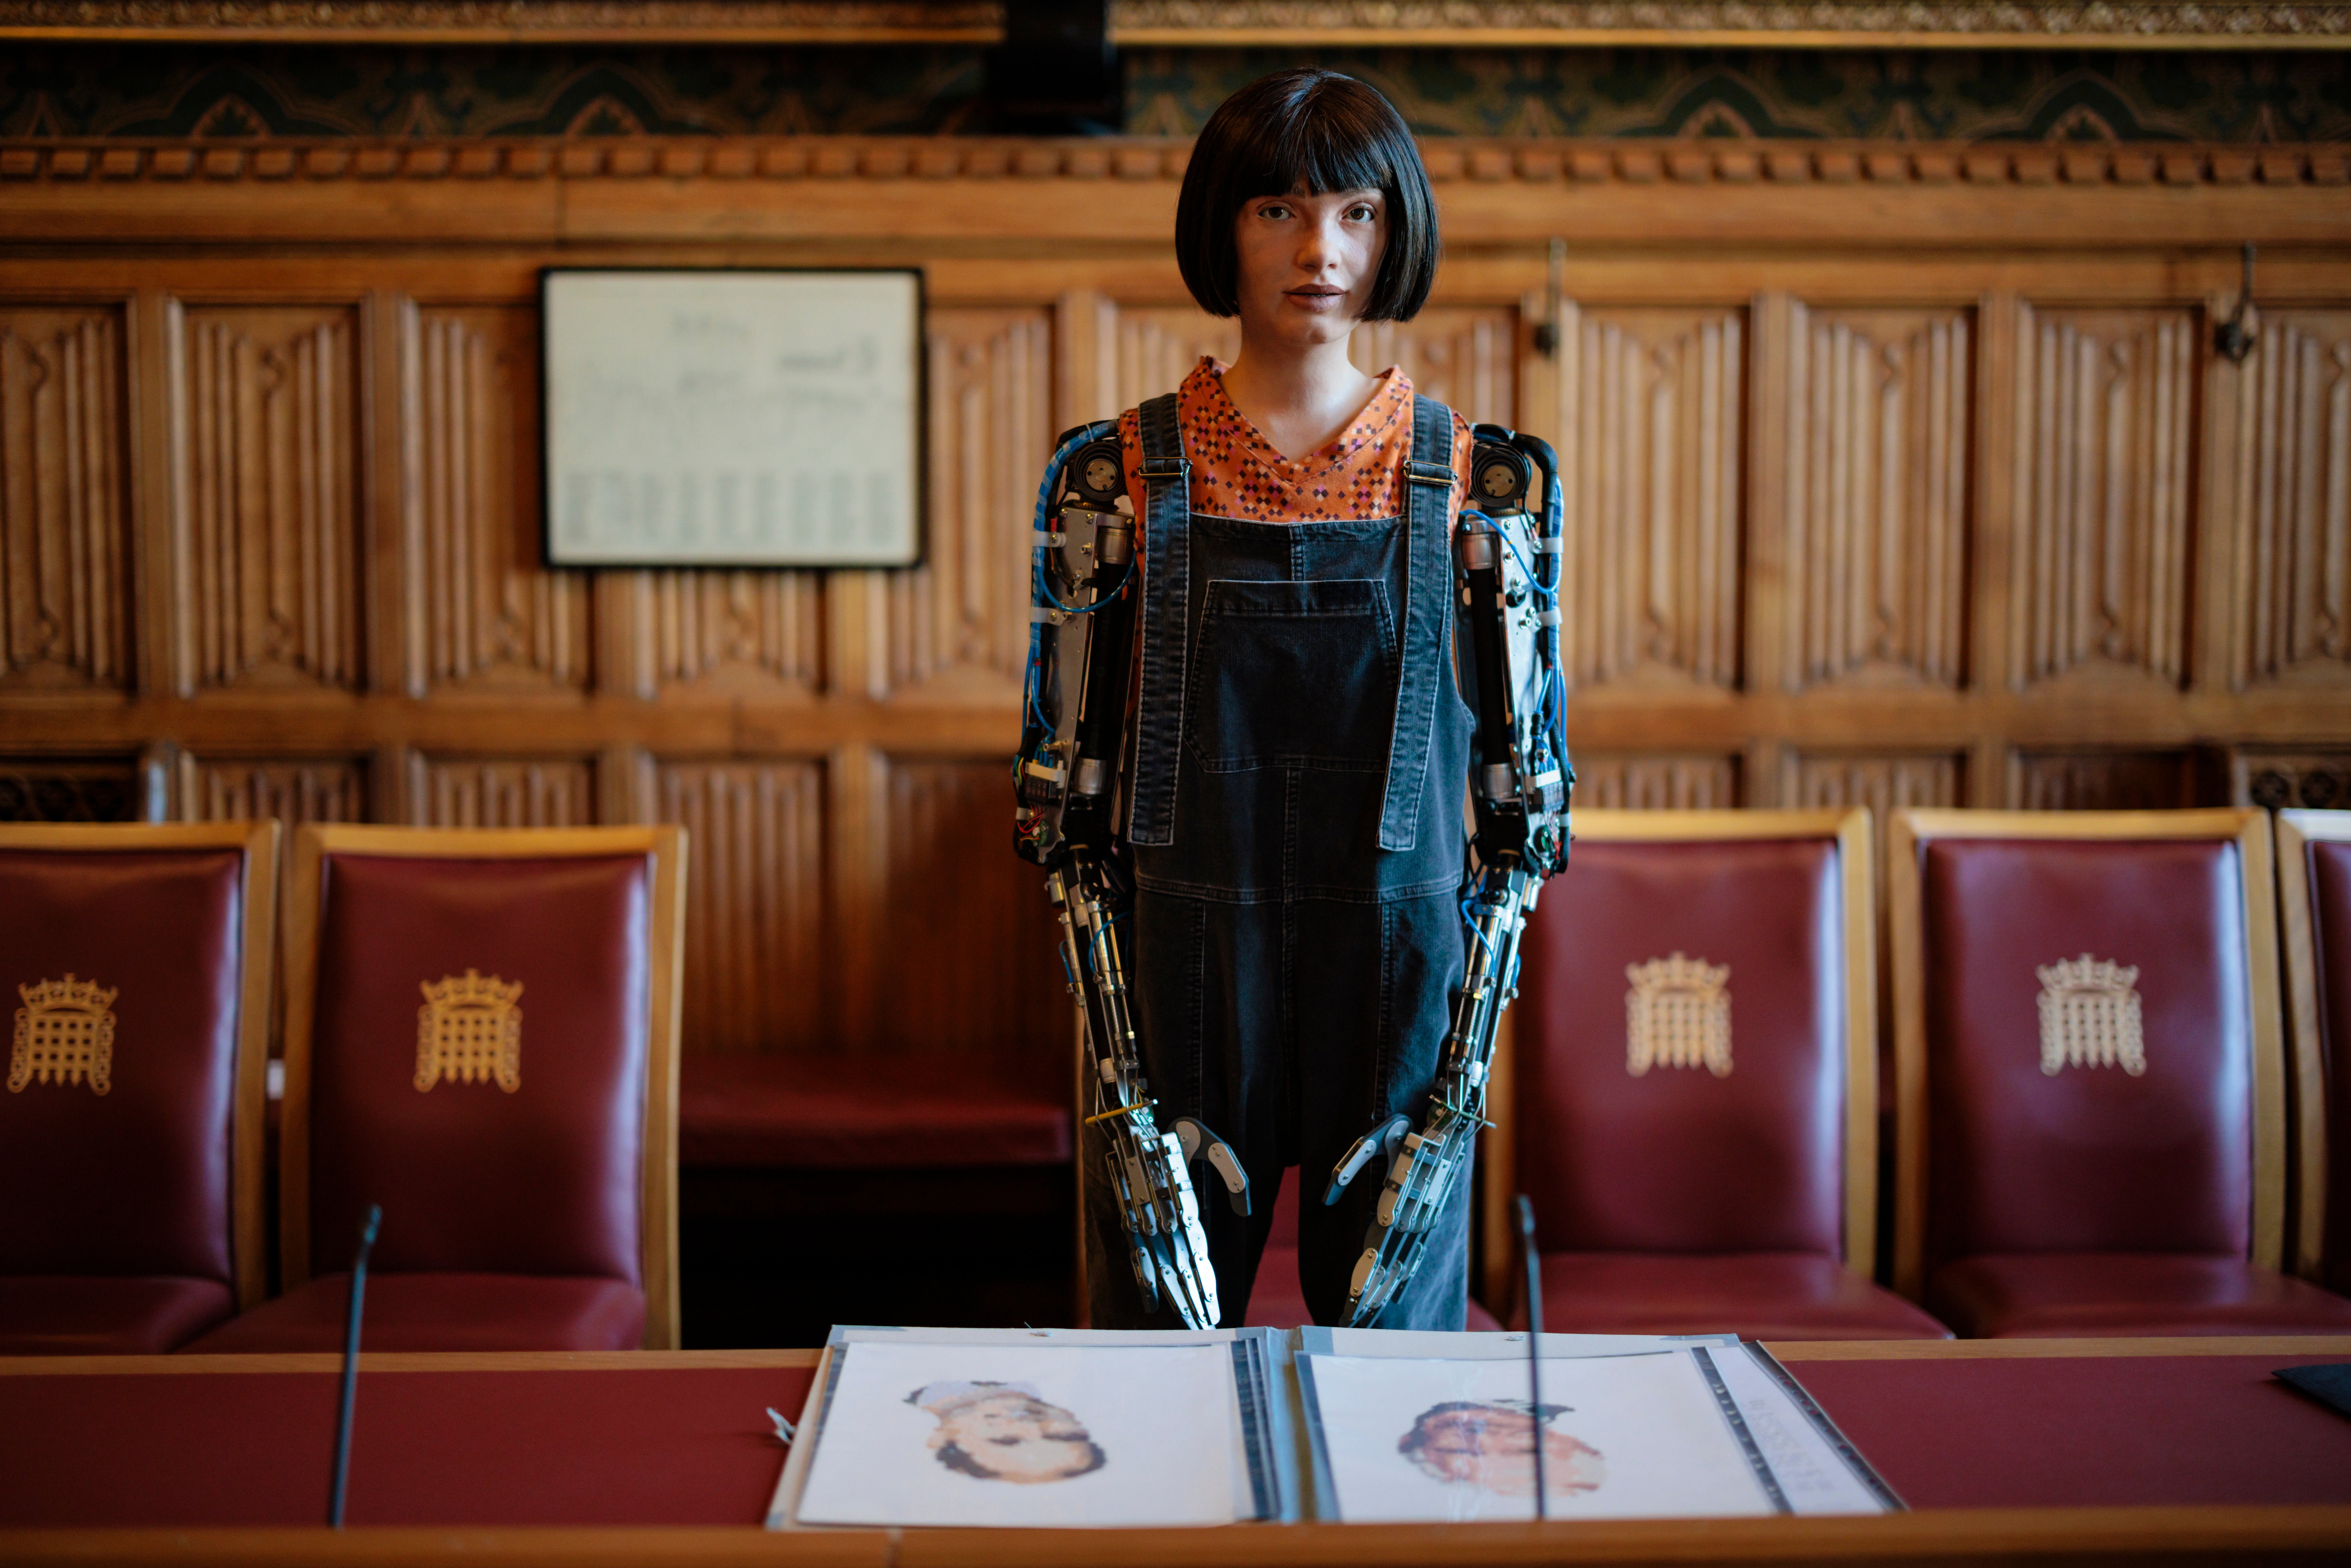 Ai-Da Robot, the world’s first ultra-realistic humanoid robot artist, appears at a photo call in a committee room in the House of Lords in October 2022